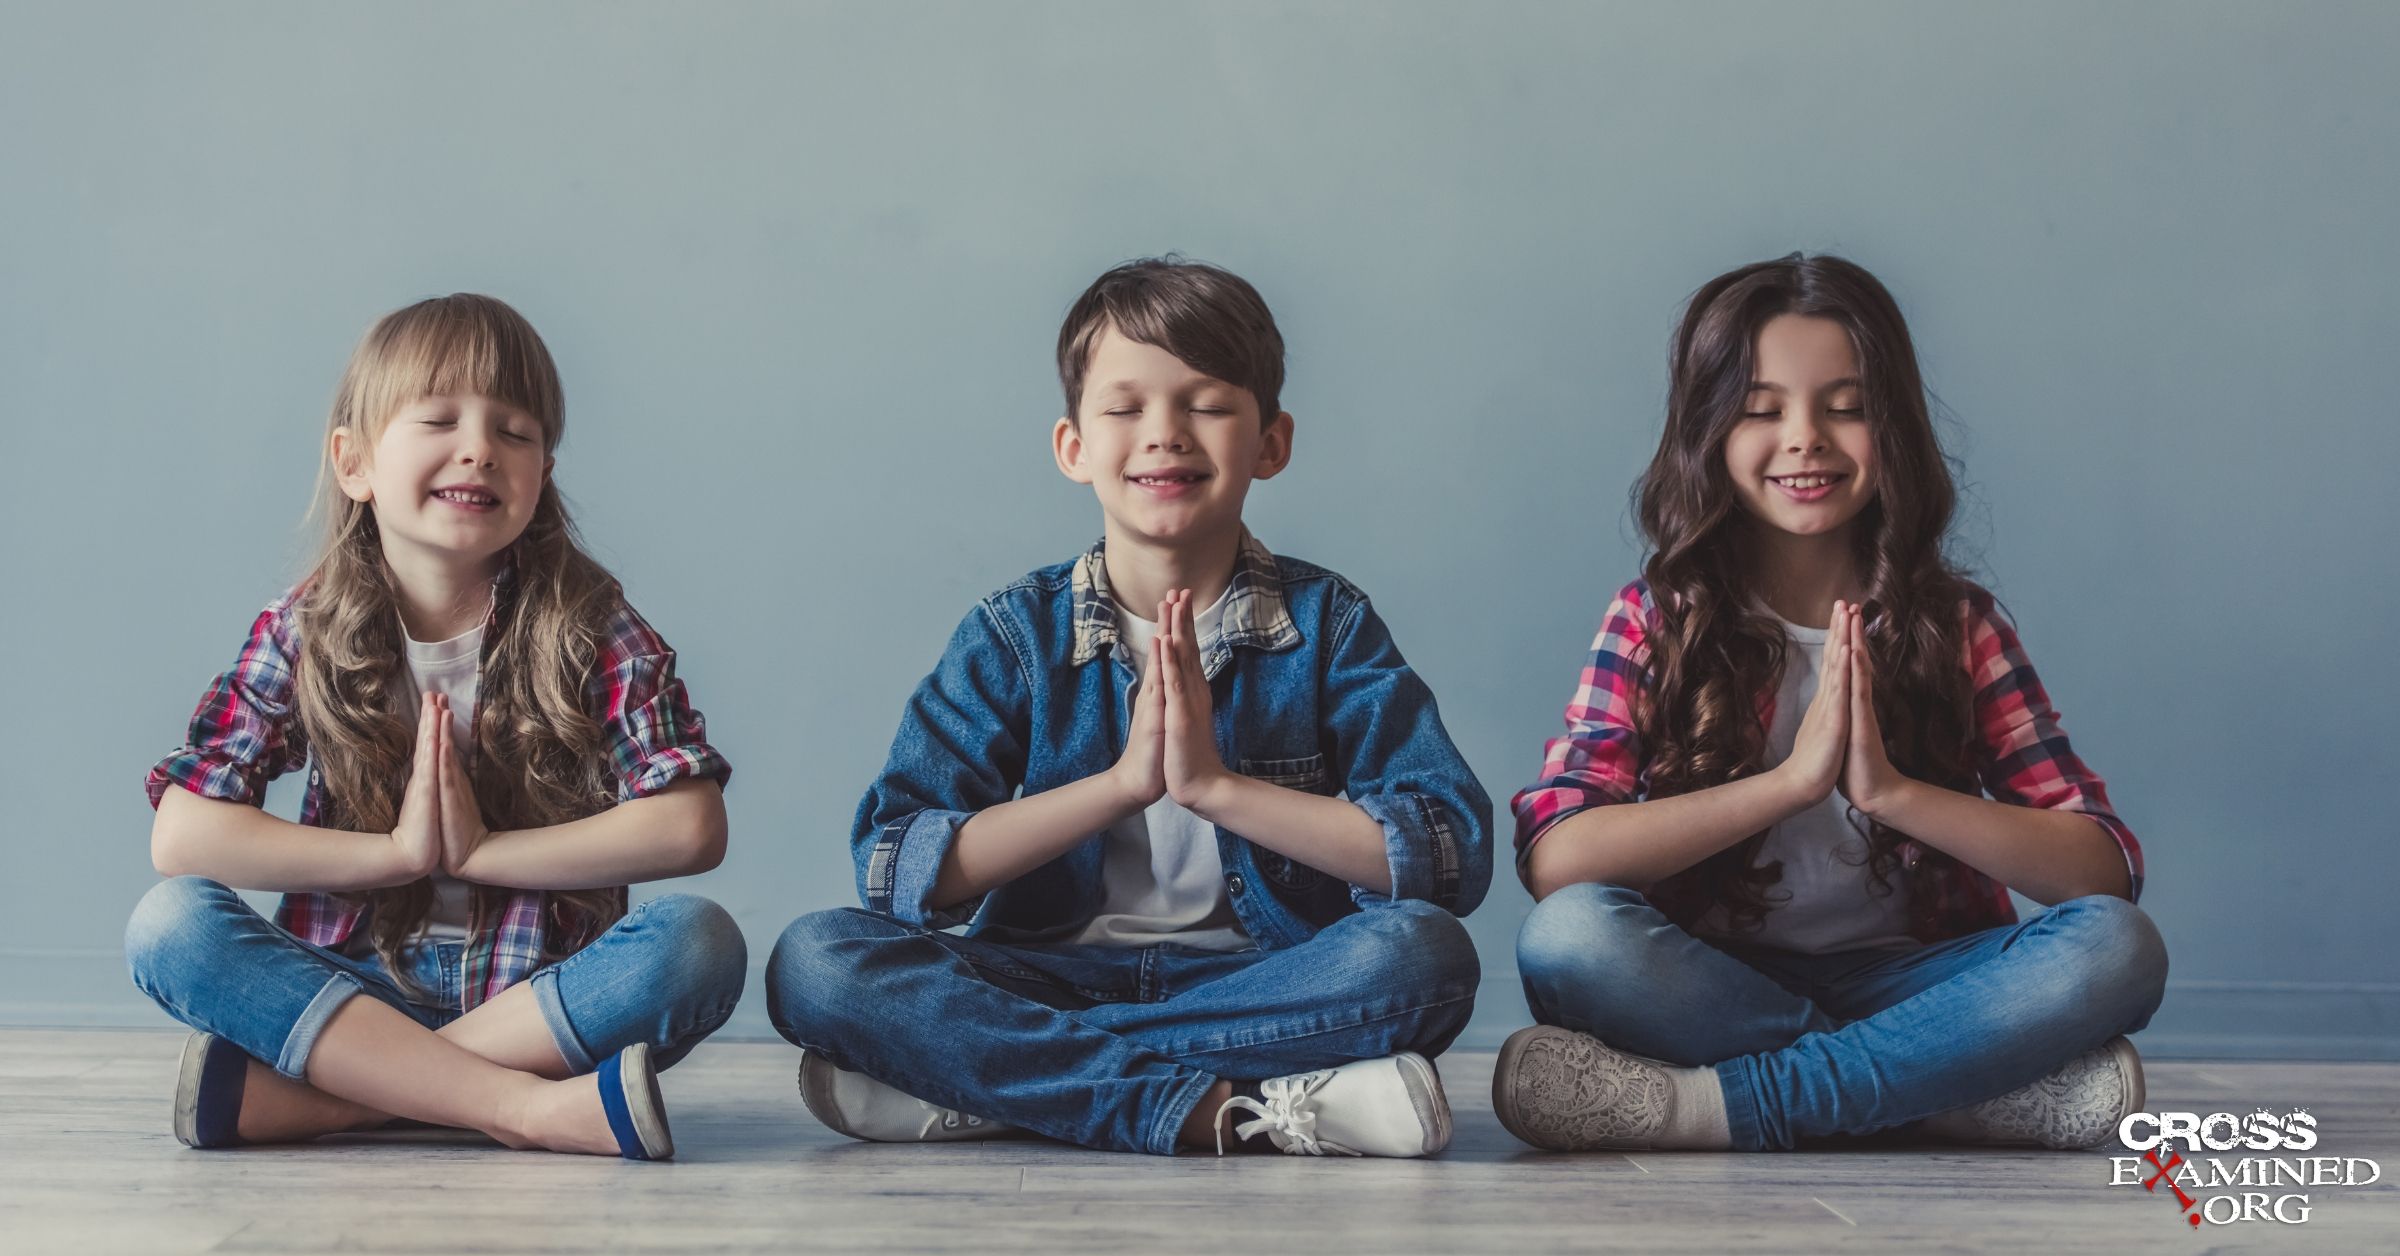 Should You Raise Your Kids in a Christian Bubble?